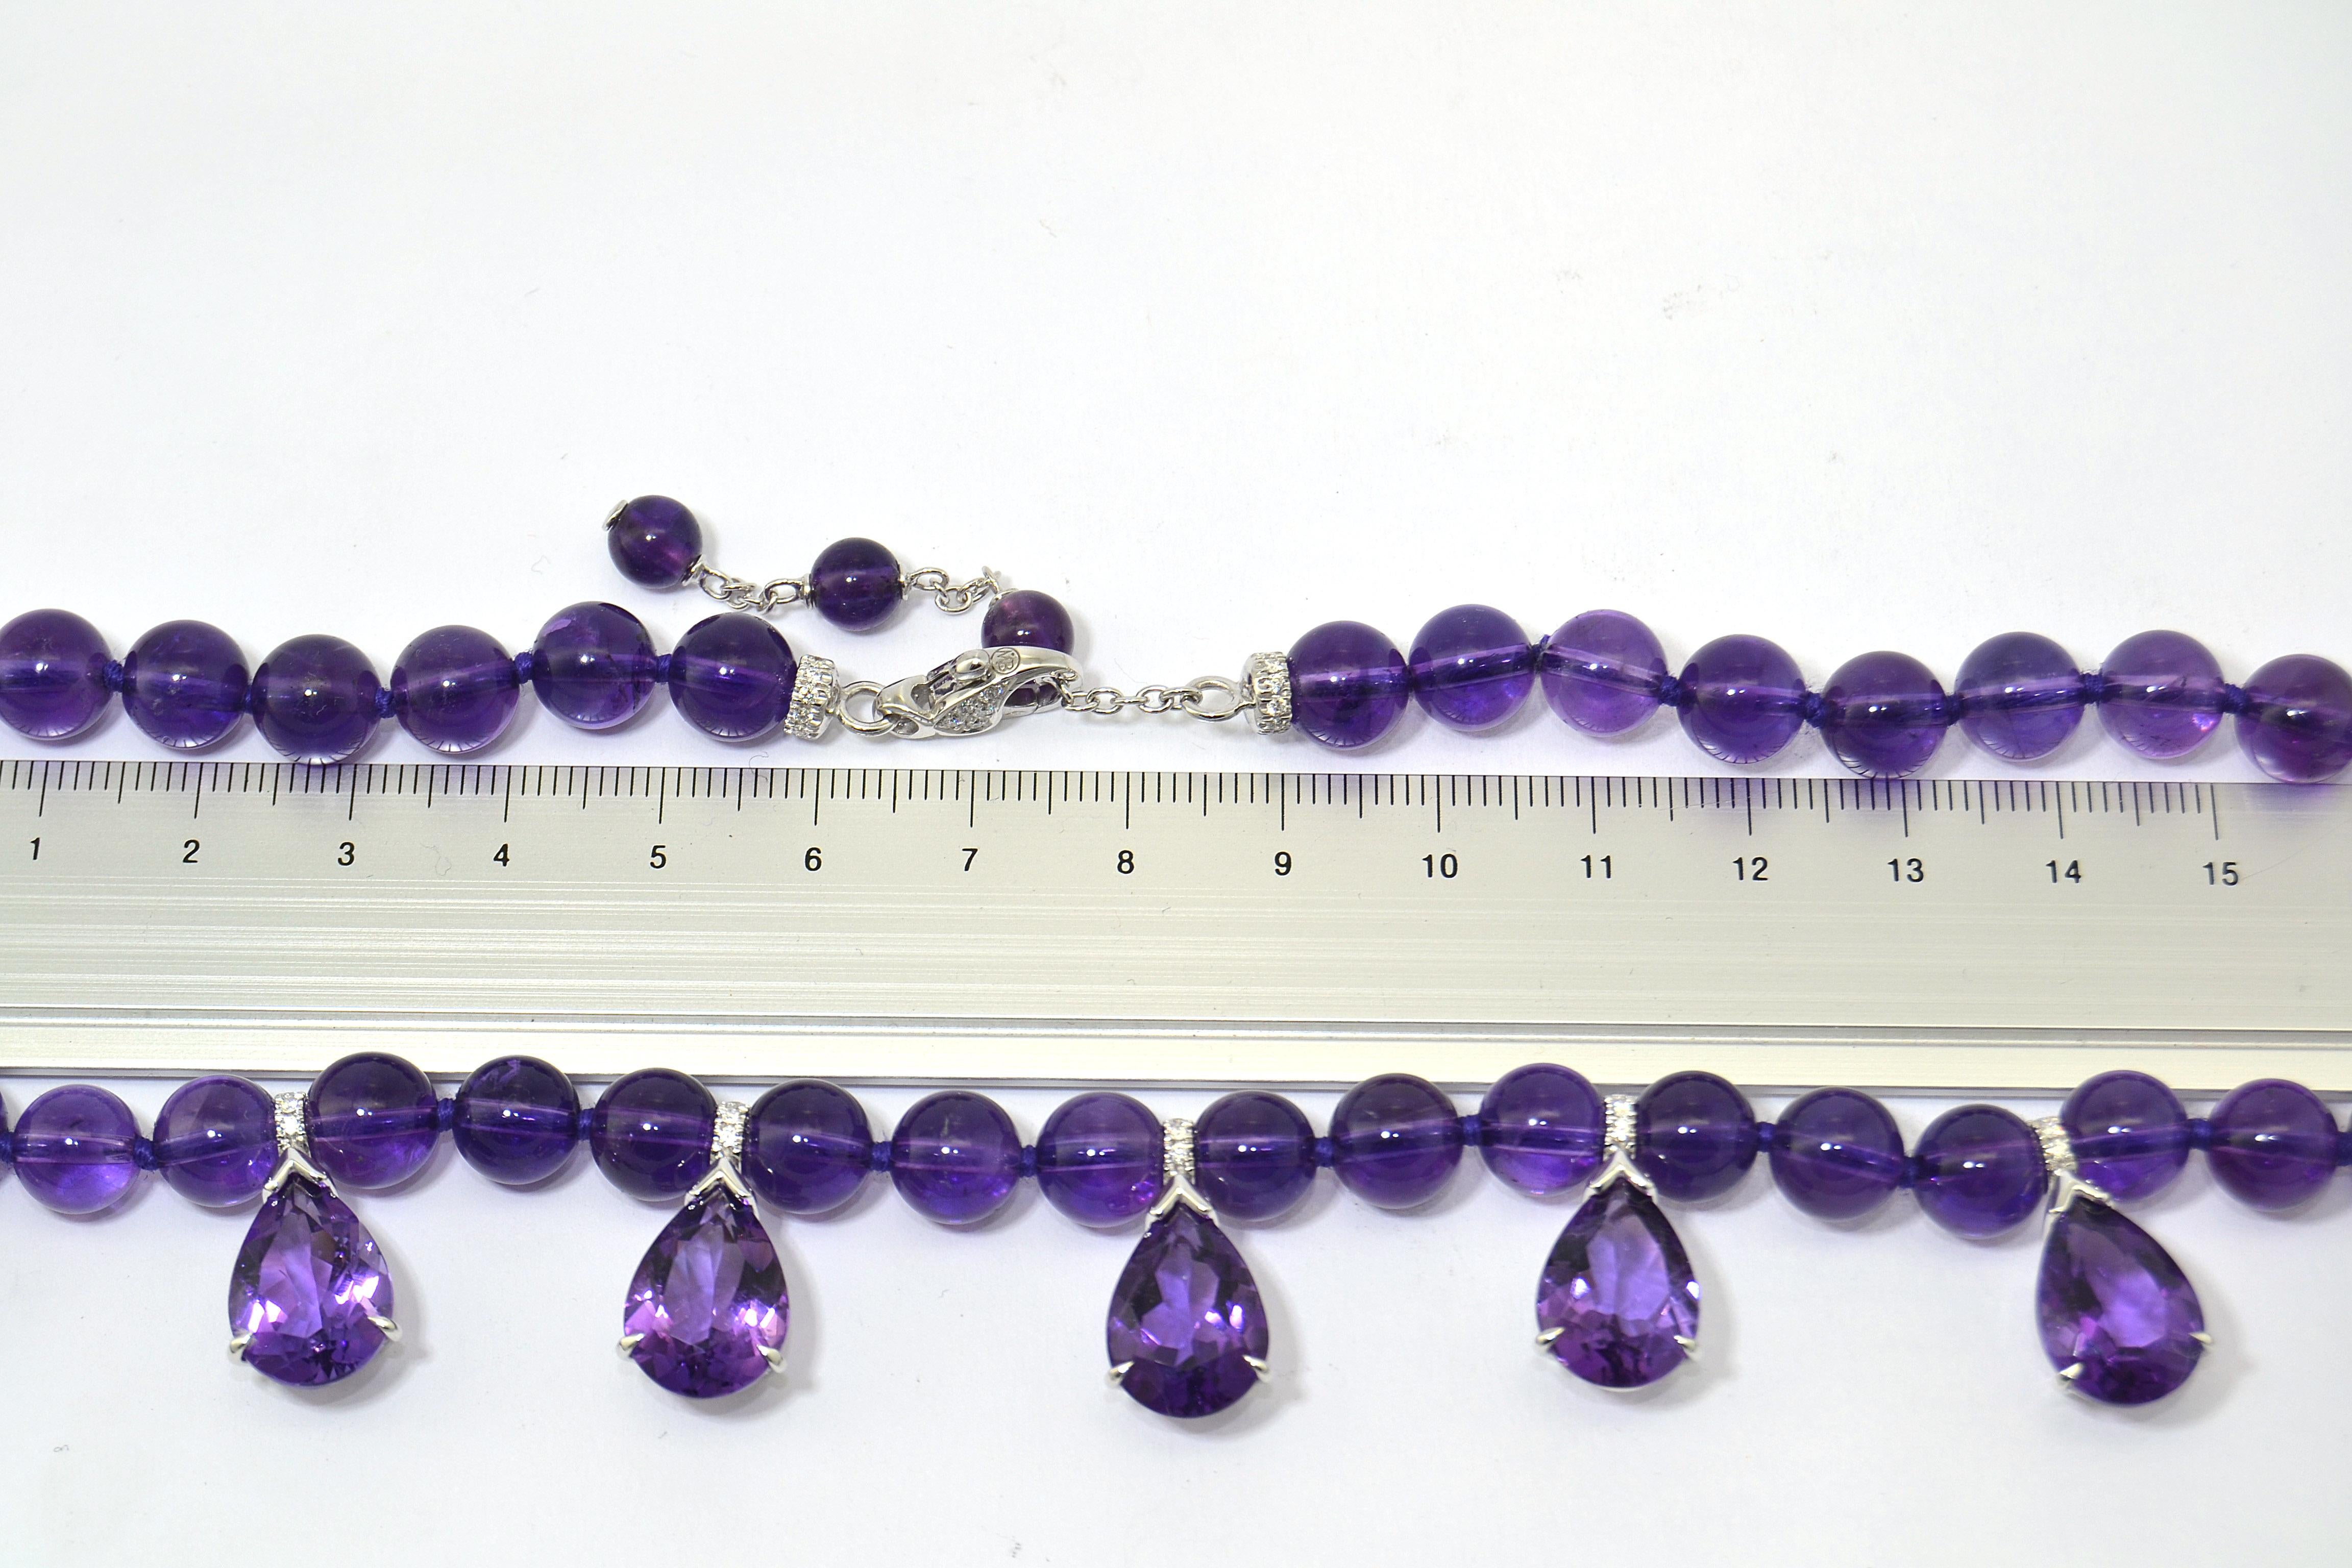 The necklace features 5 faceted drops of amethyst and diamonds mounted in 18 kt white gold decorating a strand of amethyst balls
Soft, light, comfortable, easy and chic at a time.
Length is adjustable to fit any neck and outfit.
Please note that